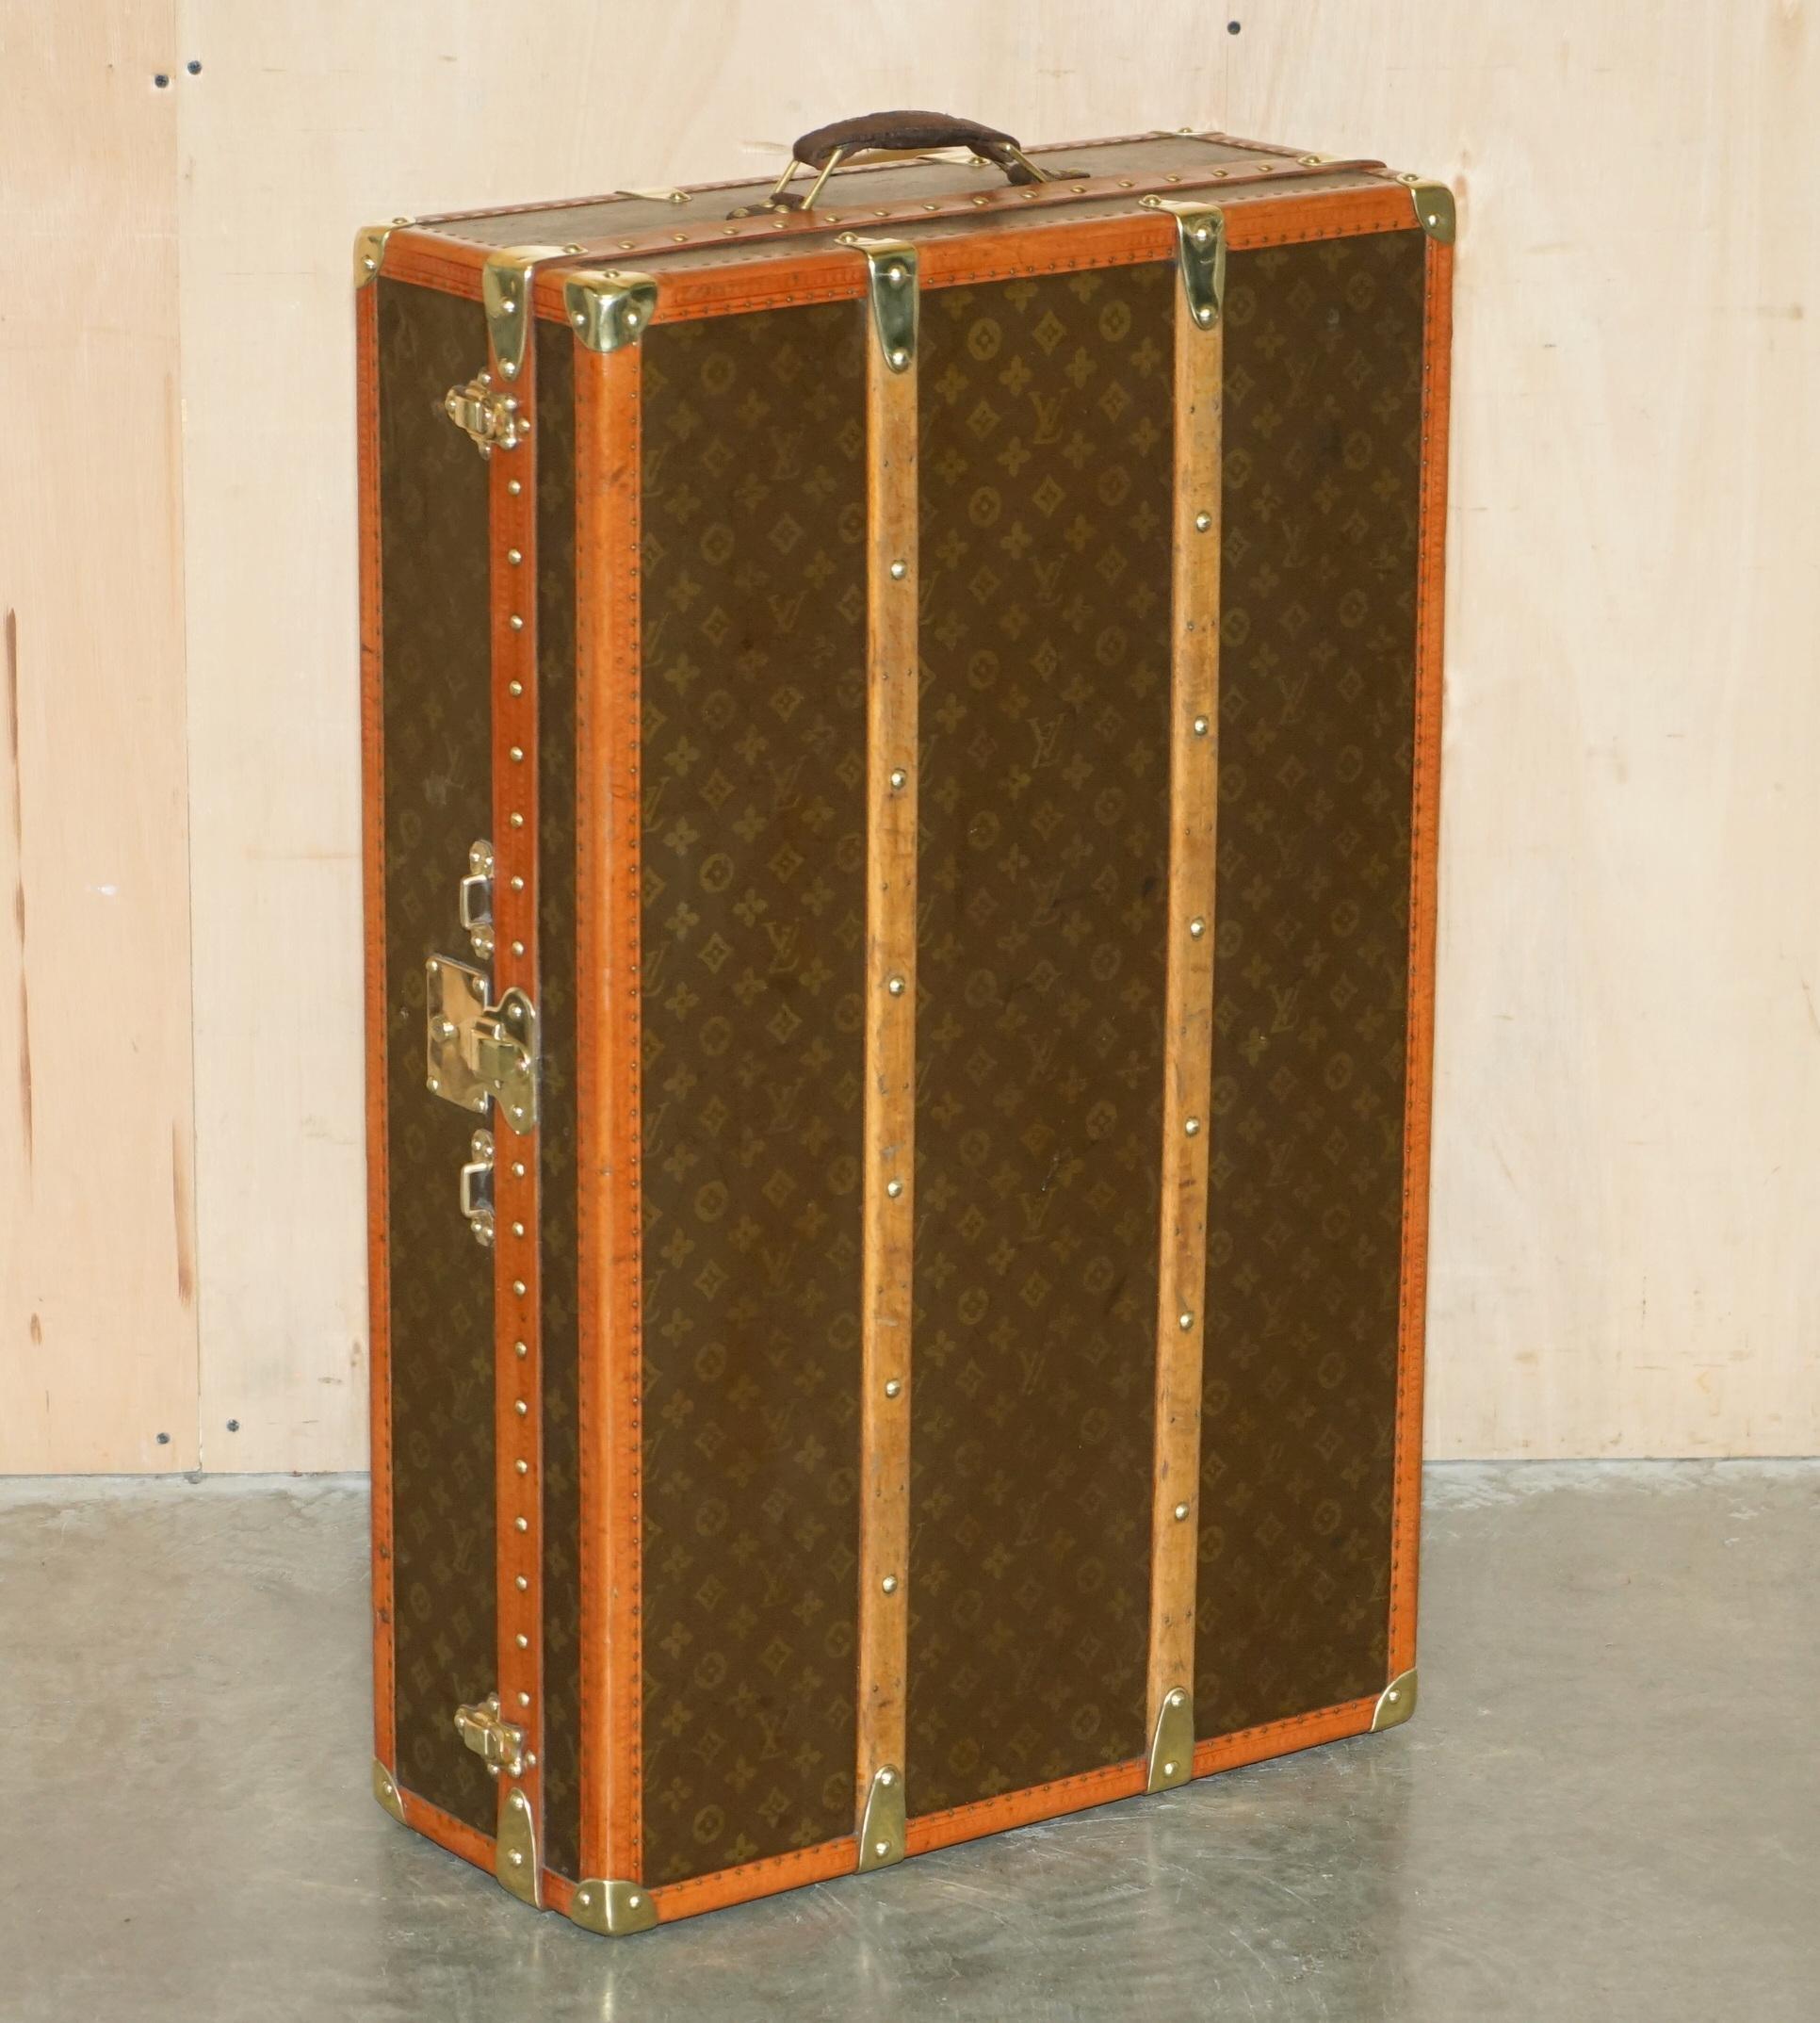 Royal House Antiques

Royal House Antiques is delighted to offer for sale this absolutely stunning fully restored original Louis Vuitton steamer small wardrobe Monogram Trunk RRP £55,000

Please note the delivery fee listed is just a guide, it